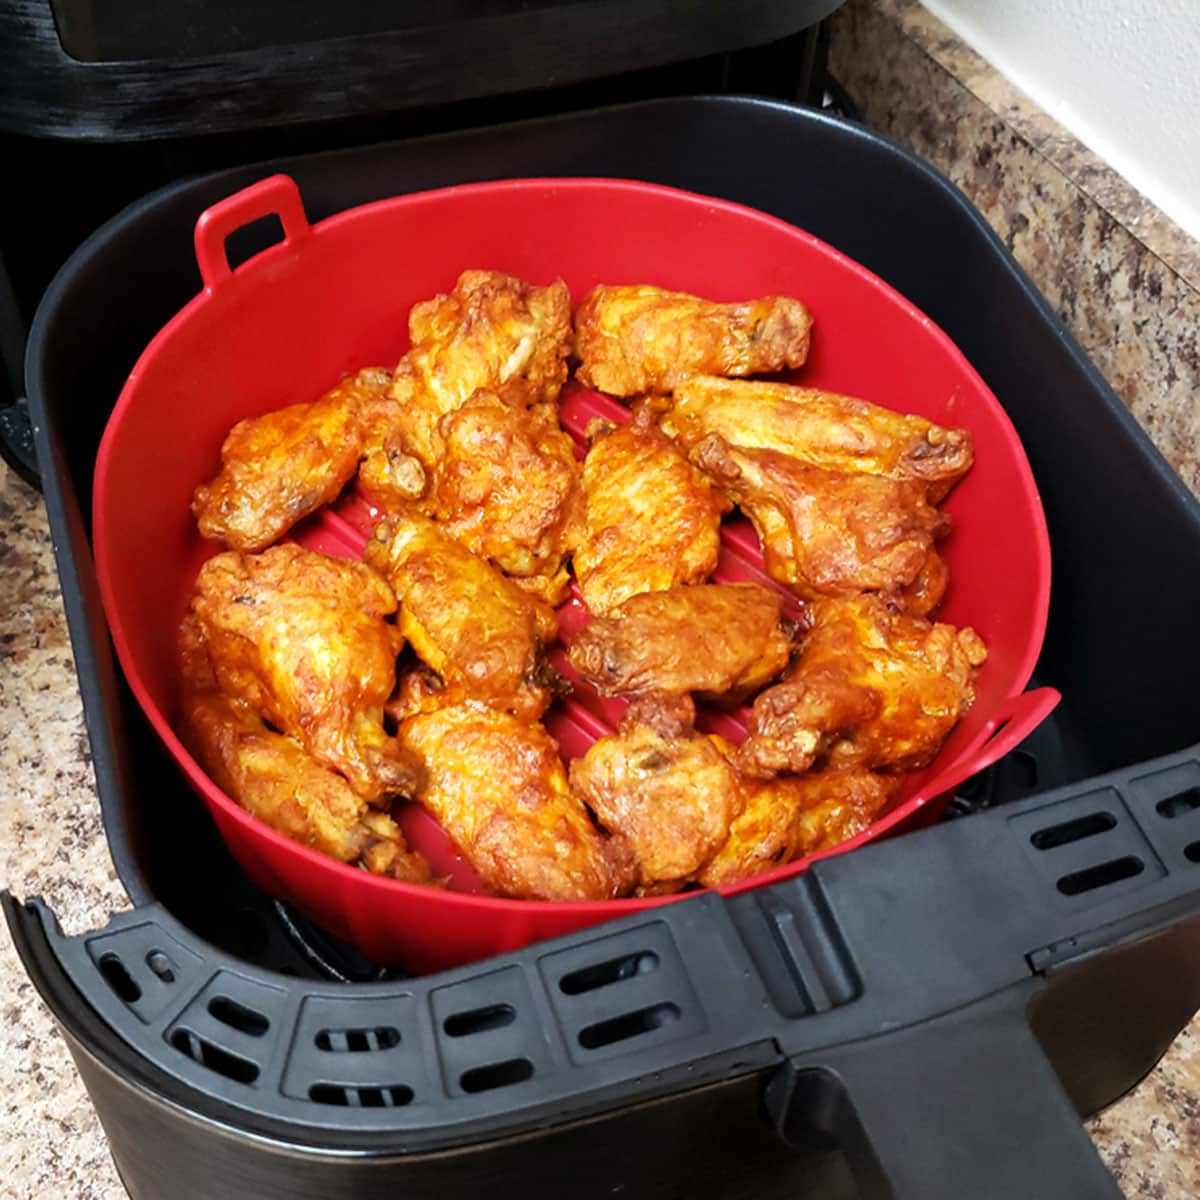 Can you put a plate in an air fryer? You bet the bottom dollar you can! Not only does this nifty kitchen appliance fry up your food, but it also bakes, grills and roasts.